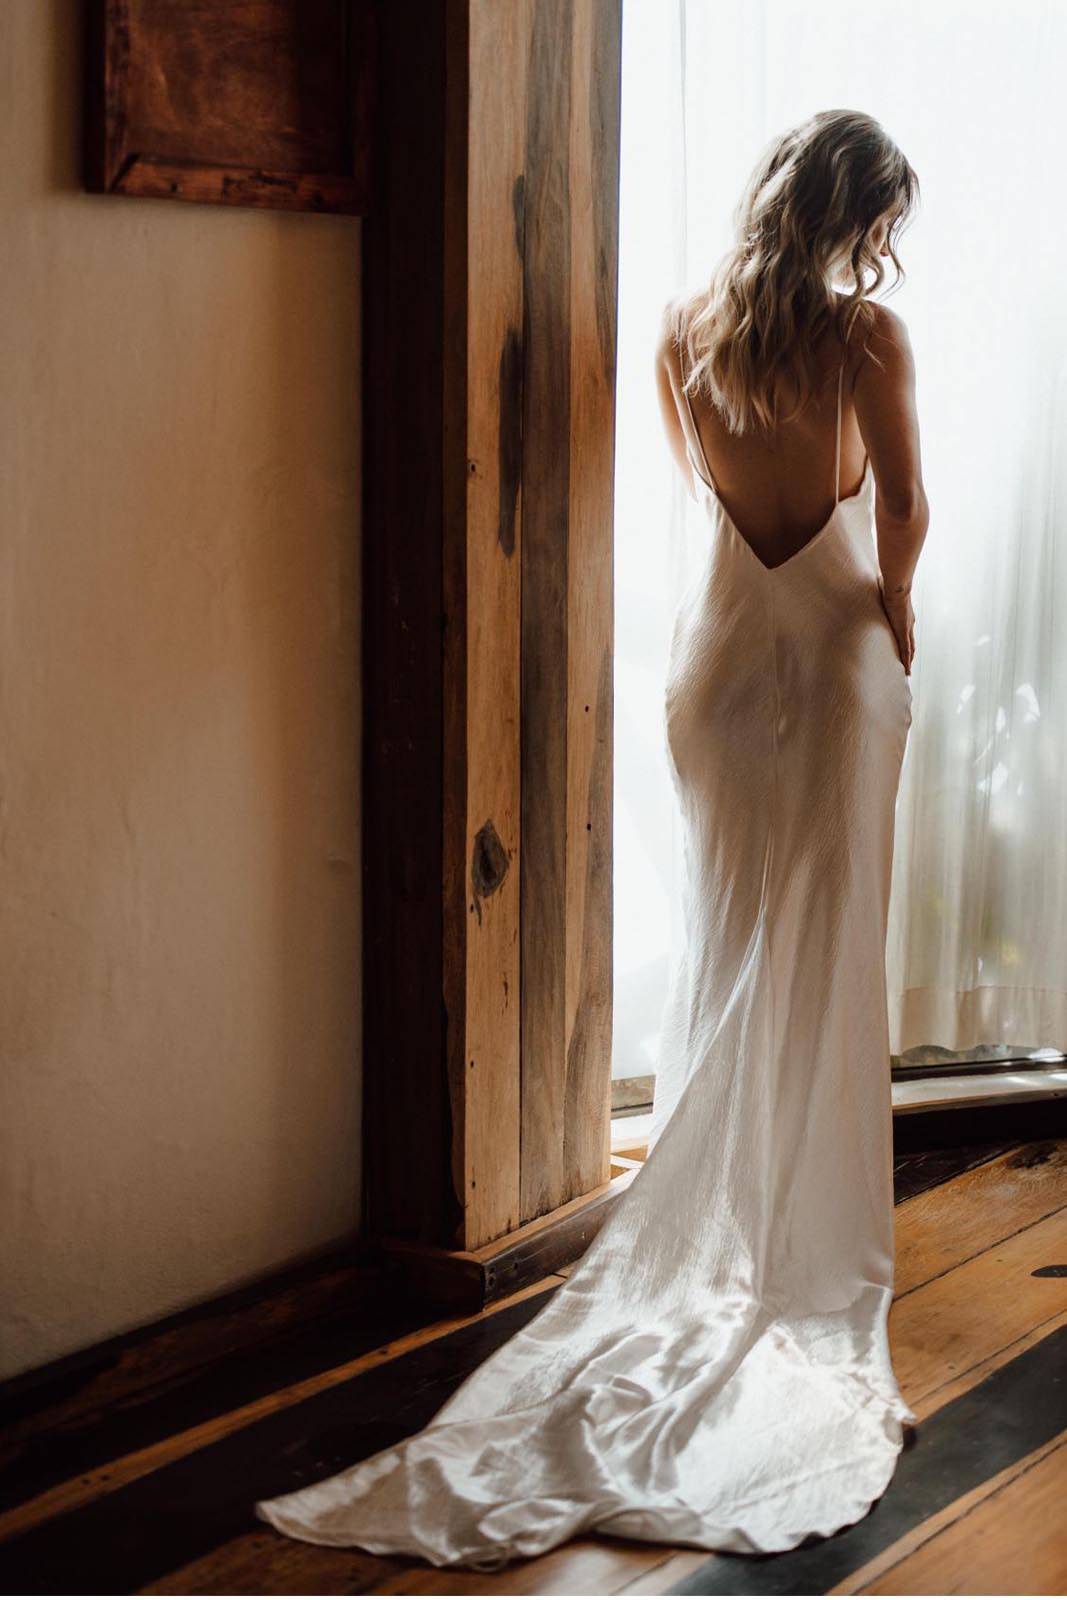 The bride's flowing, bohemian-style dress and natural, beachy hair complement the tropical surroundings perfectly.